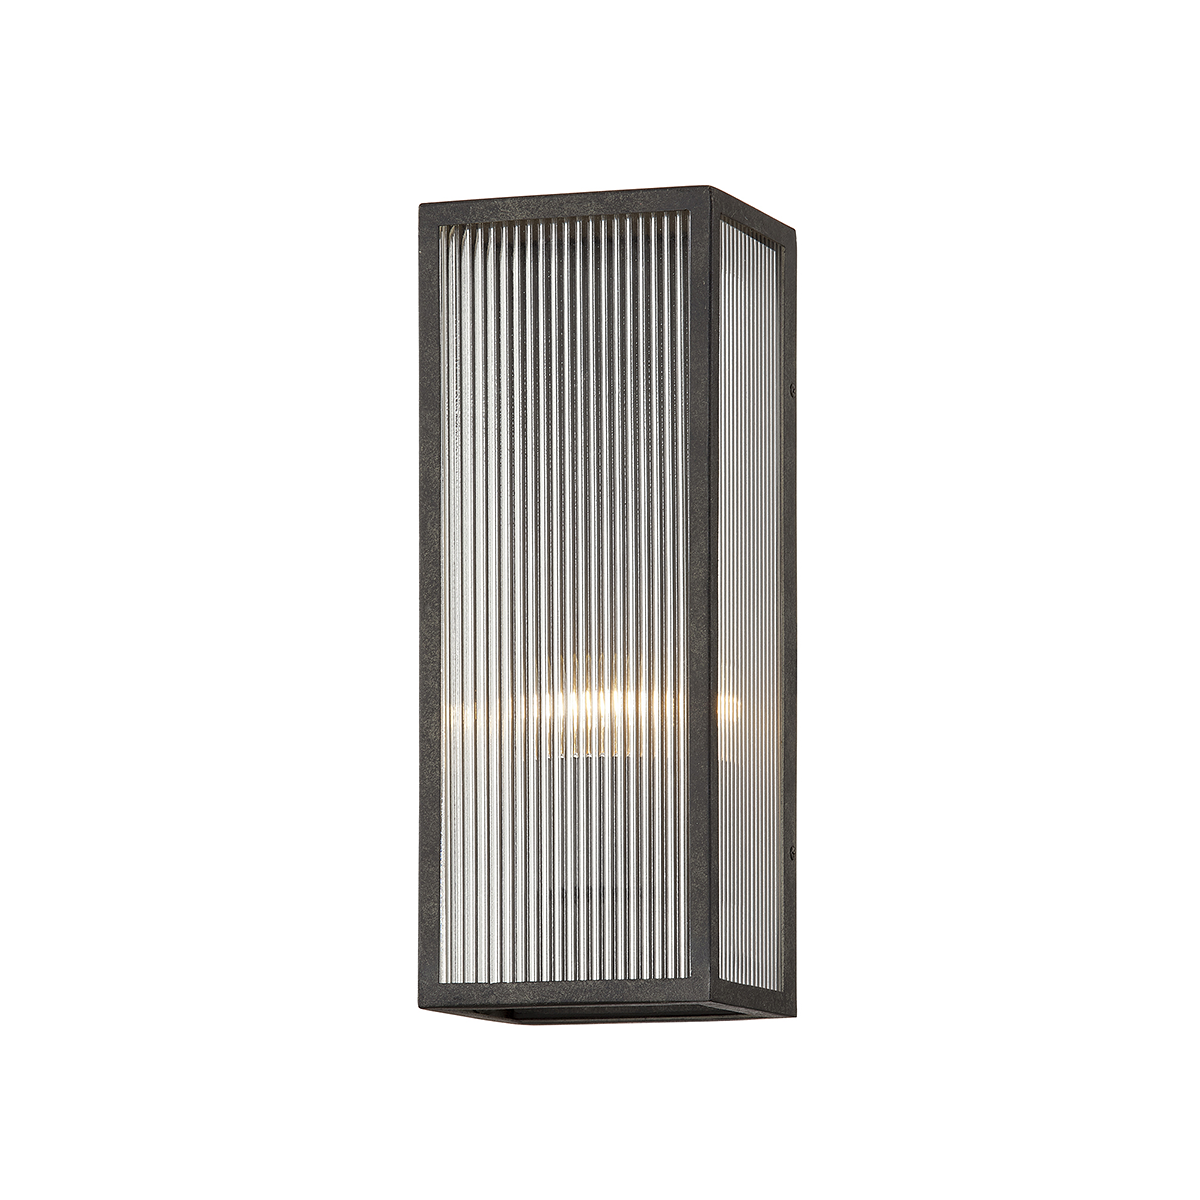 Troy Lighting TISONI 1LT WALL B7391 Outdoor l Wall Troy Lighting FRENCH IRON  